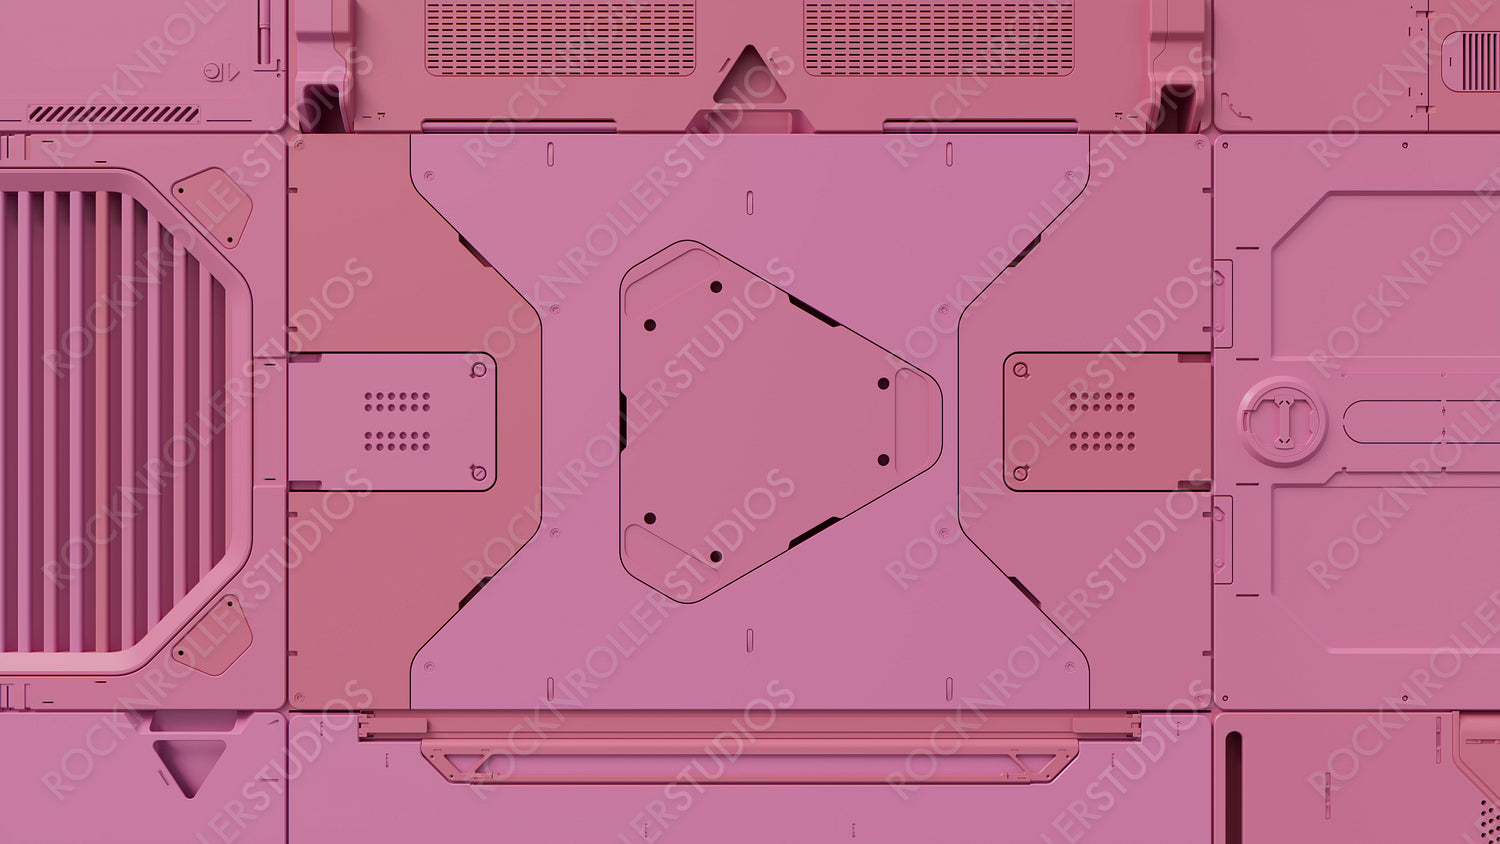 Futuristic 3D Render. Technological Wallpaper with Pink, Science Fiction Panels.